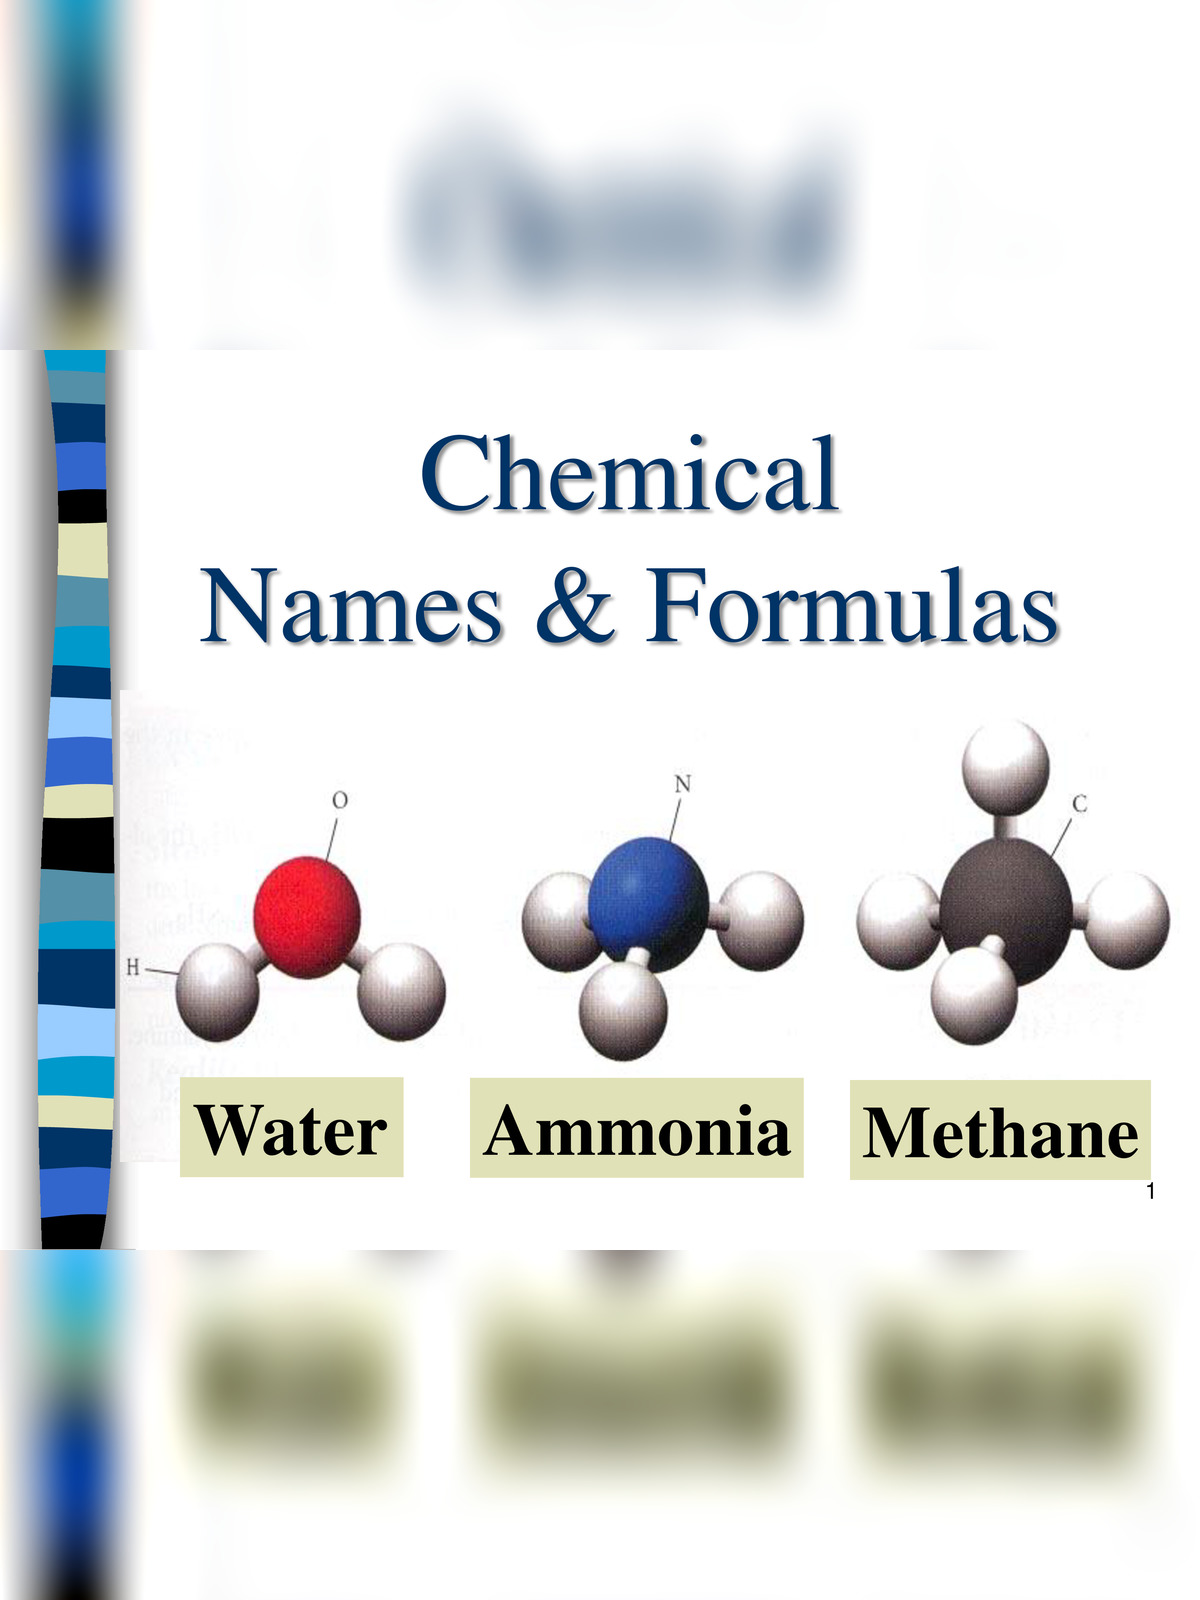 list of chemical names